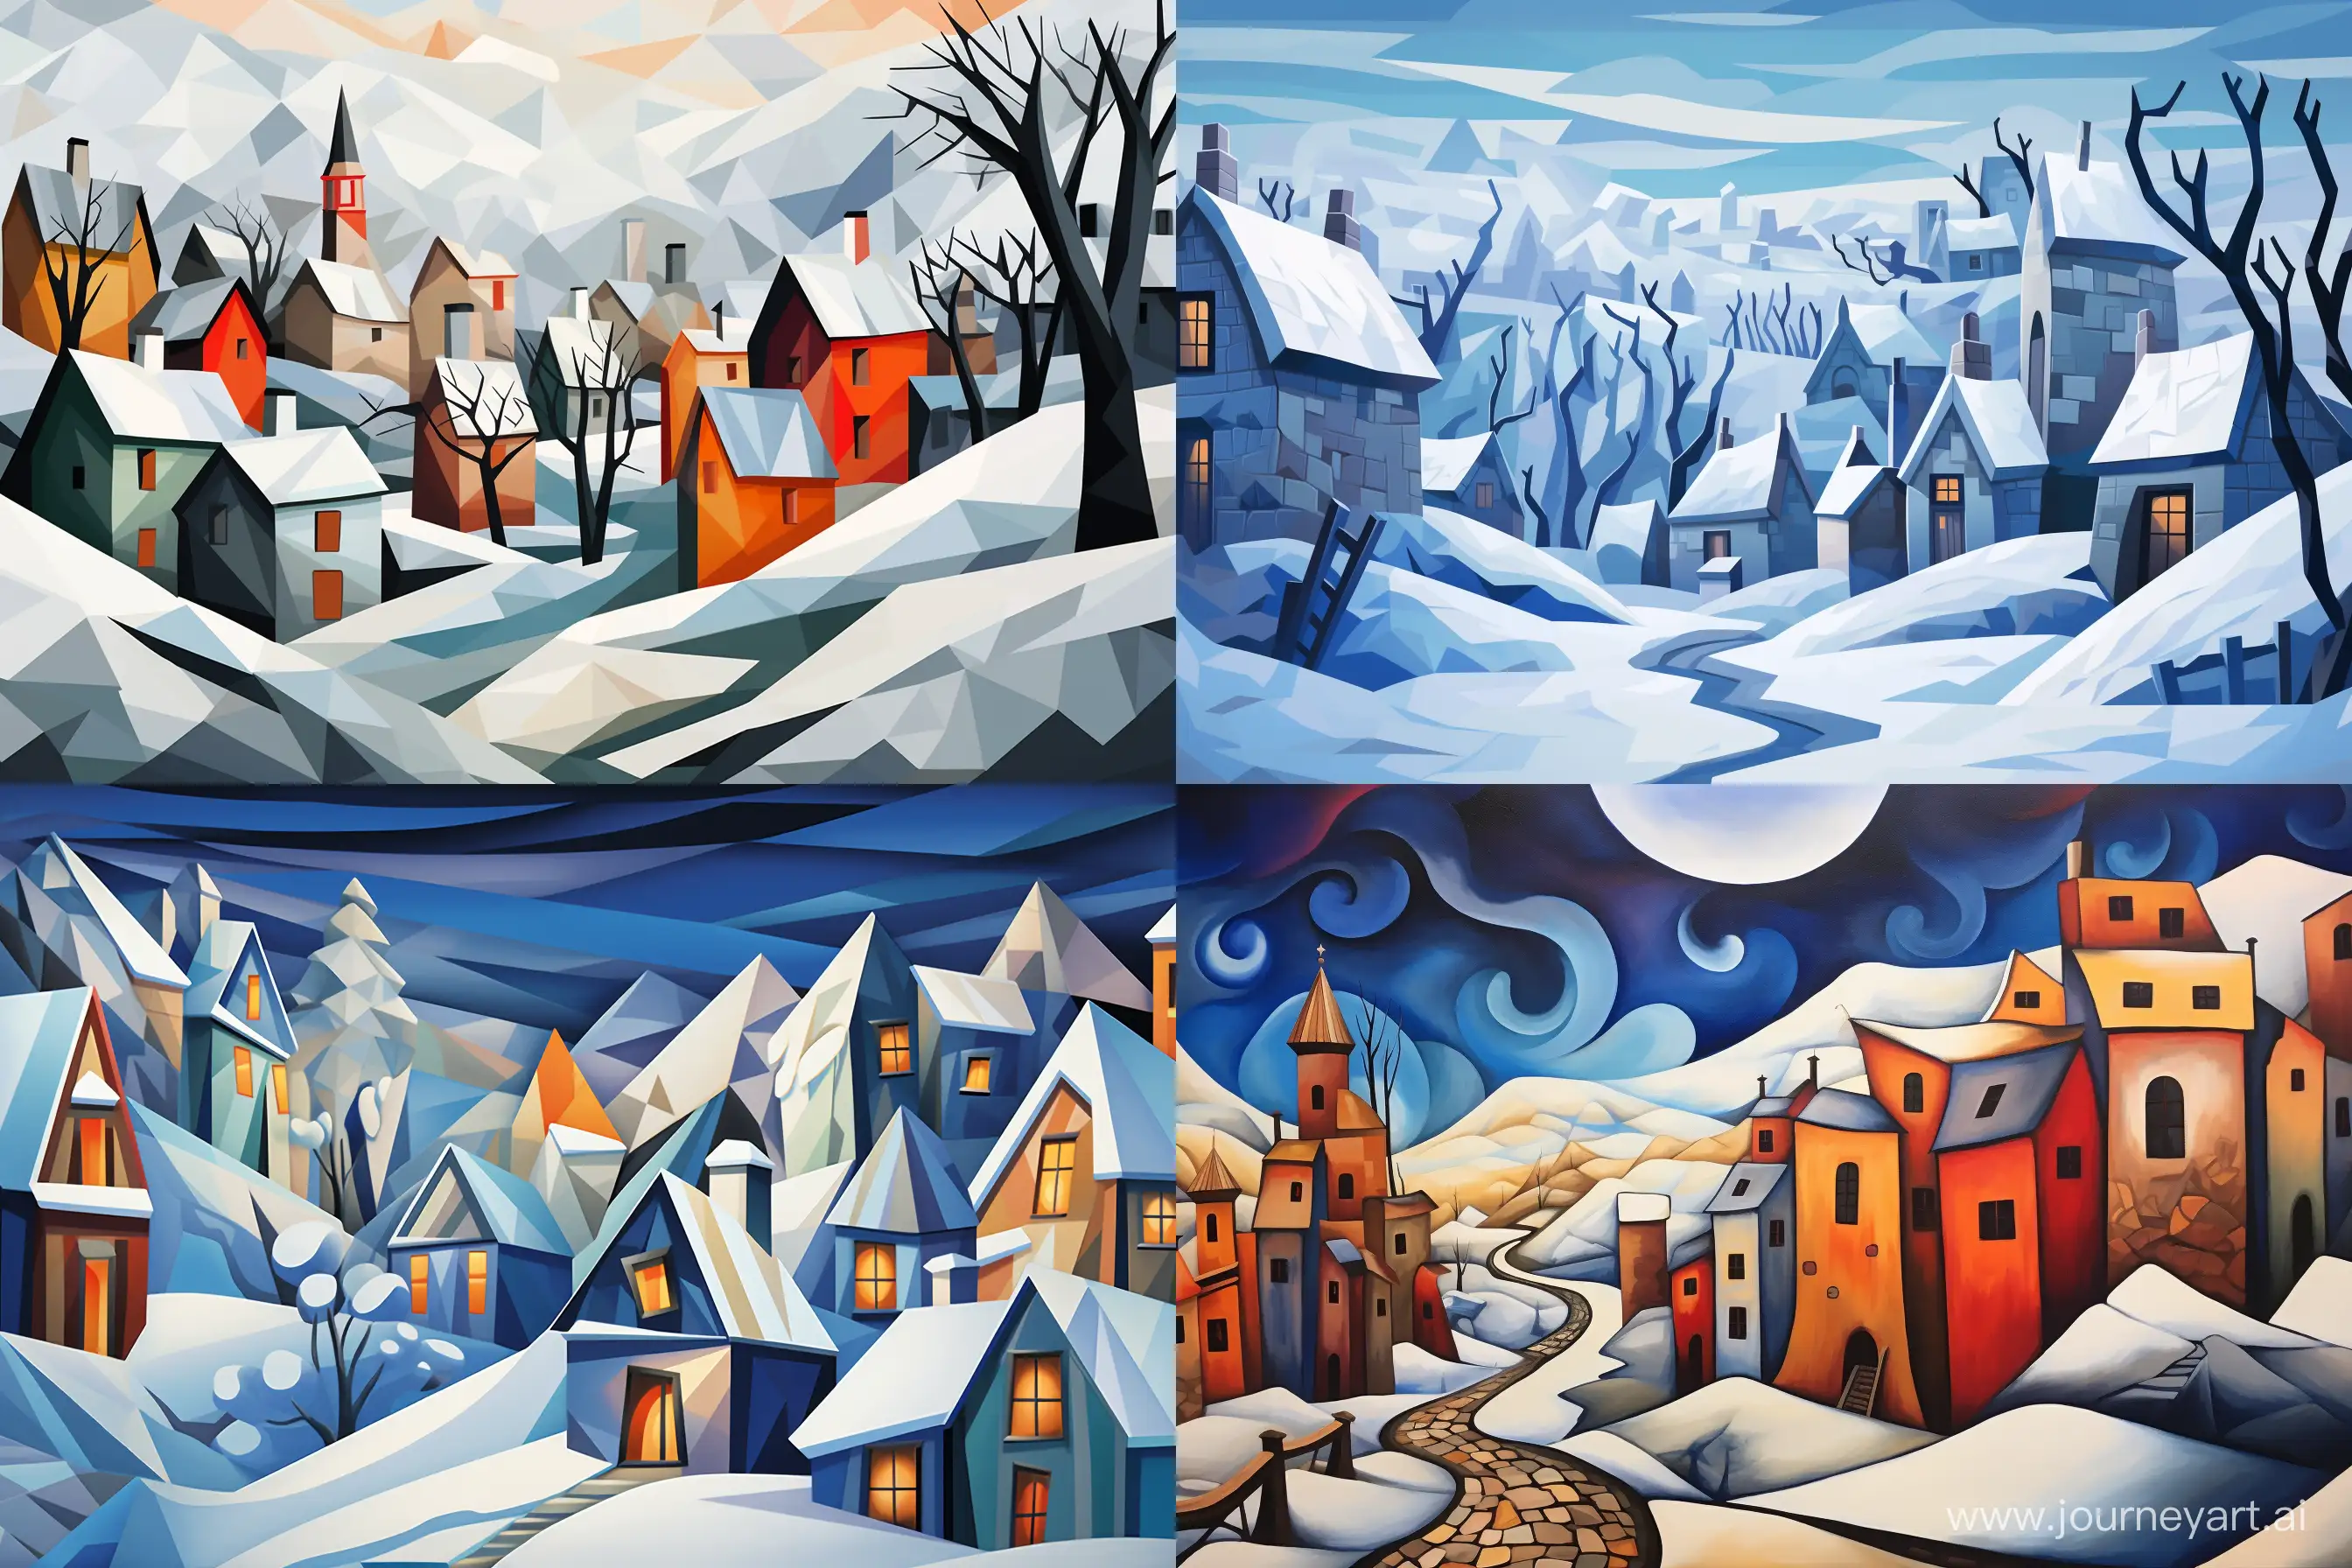 Snowy-Village-Cubism-Art-with-Dynamic-Perspectives